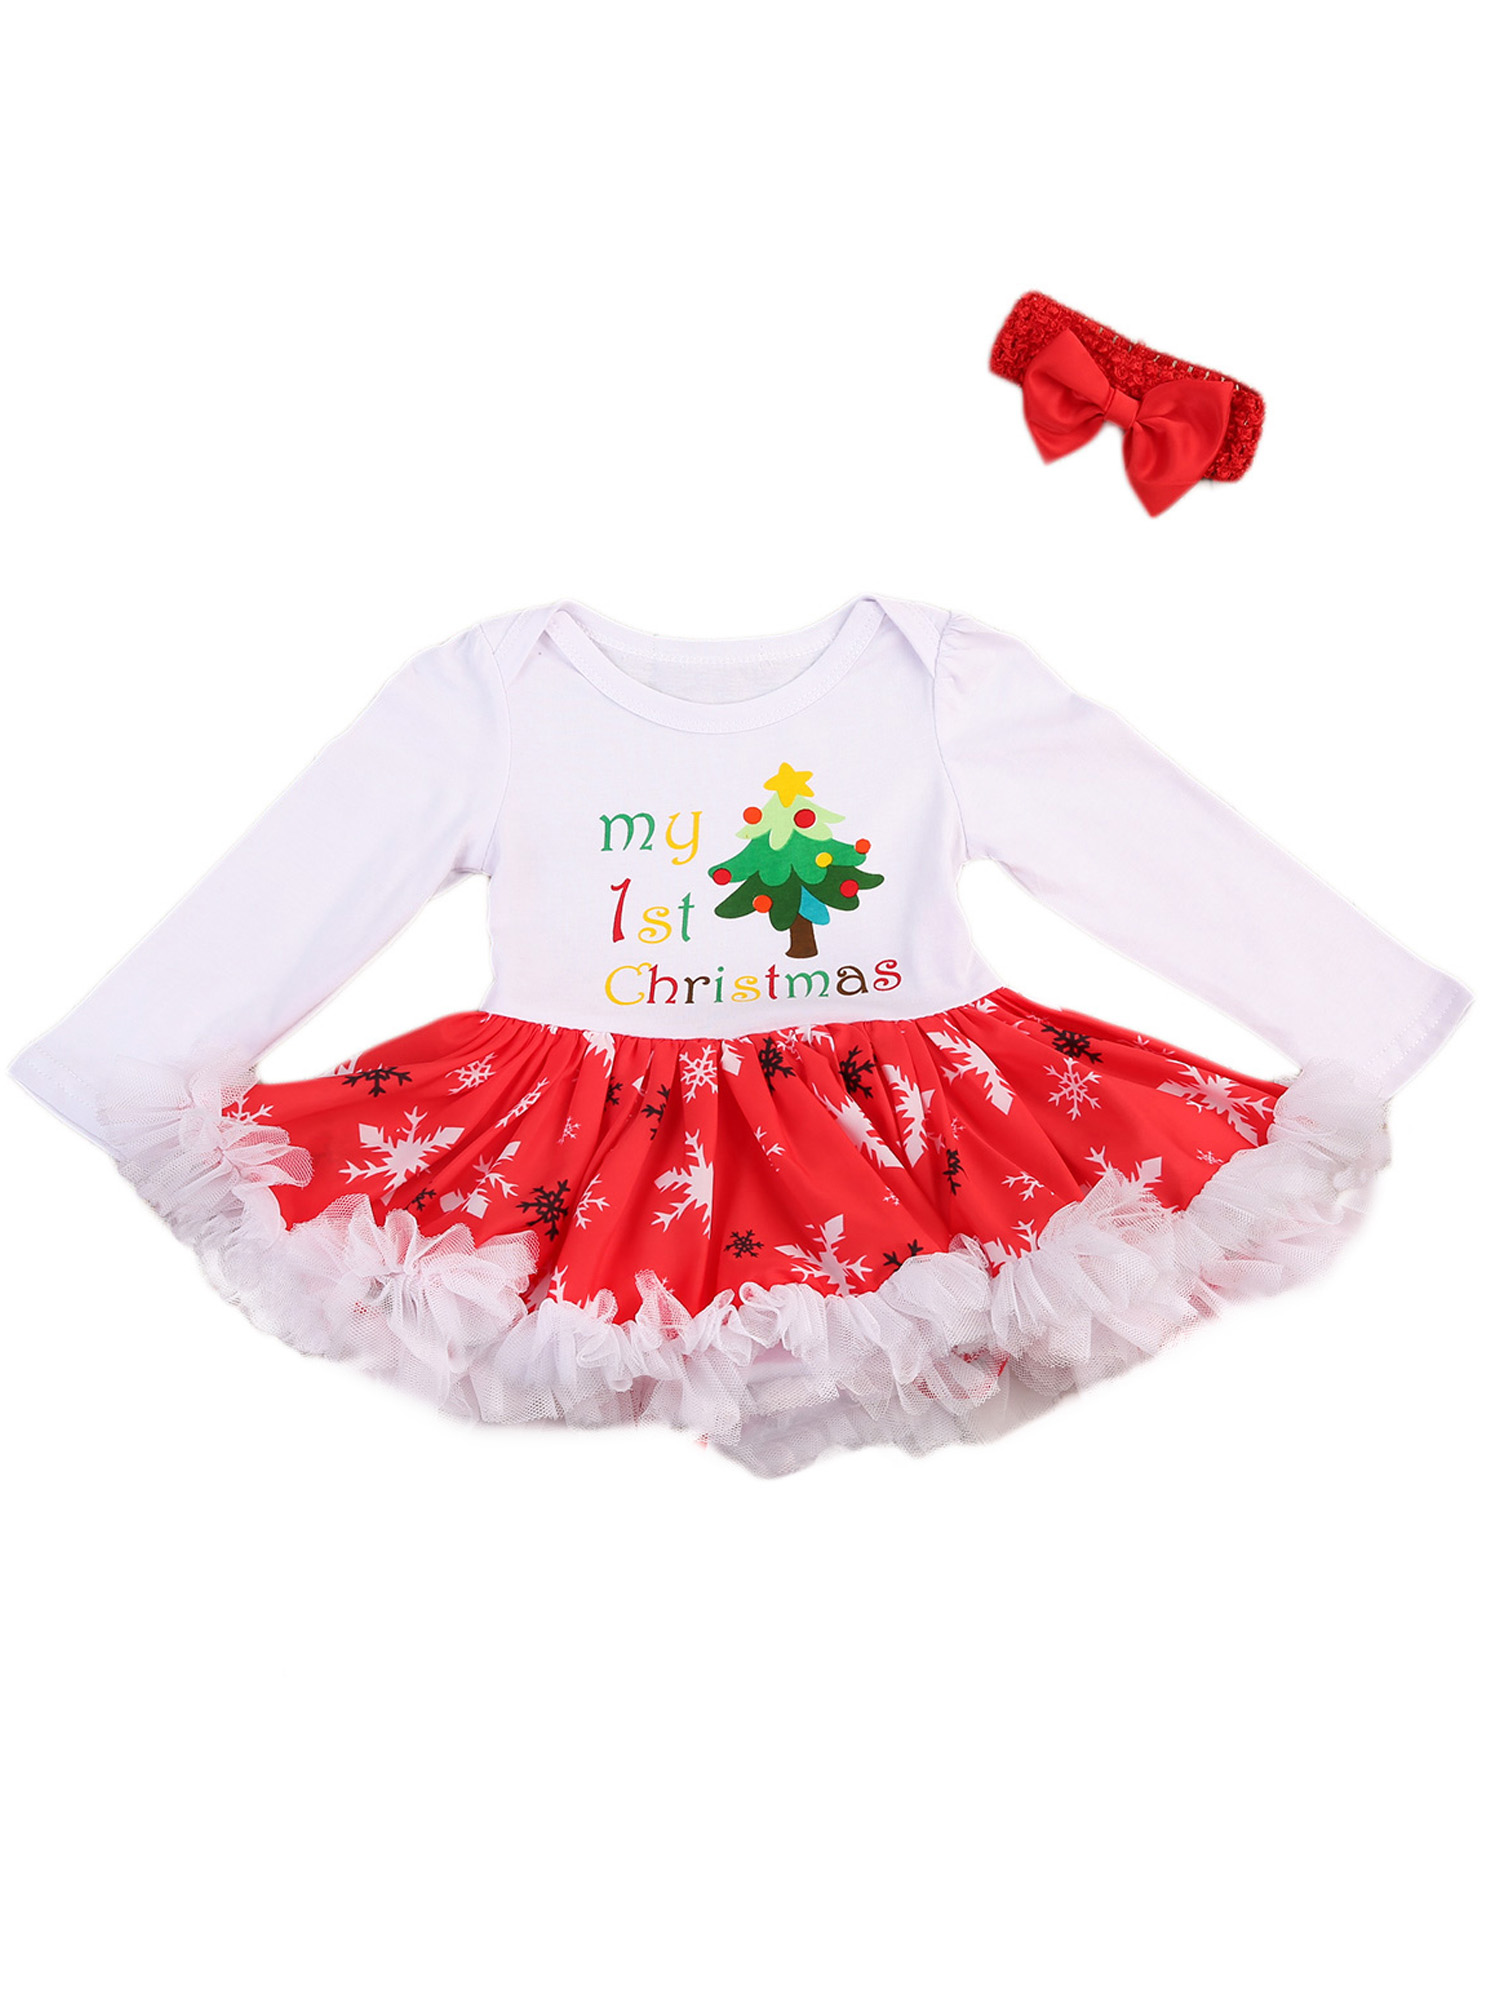 US Toddler Baby Girls Christmas Costume Party Outfit Romper Jumpsuit Fancy Dress